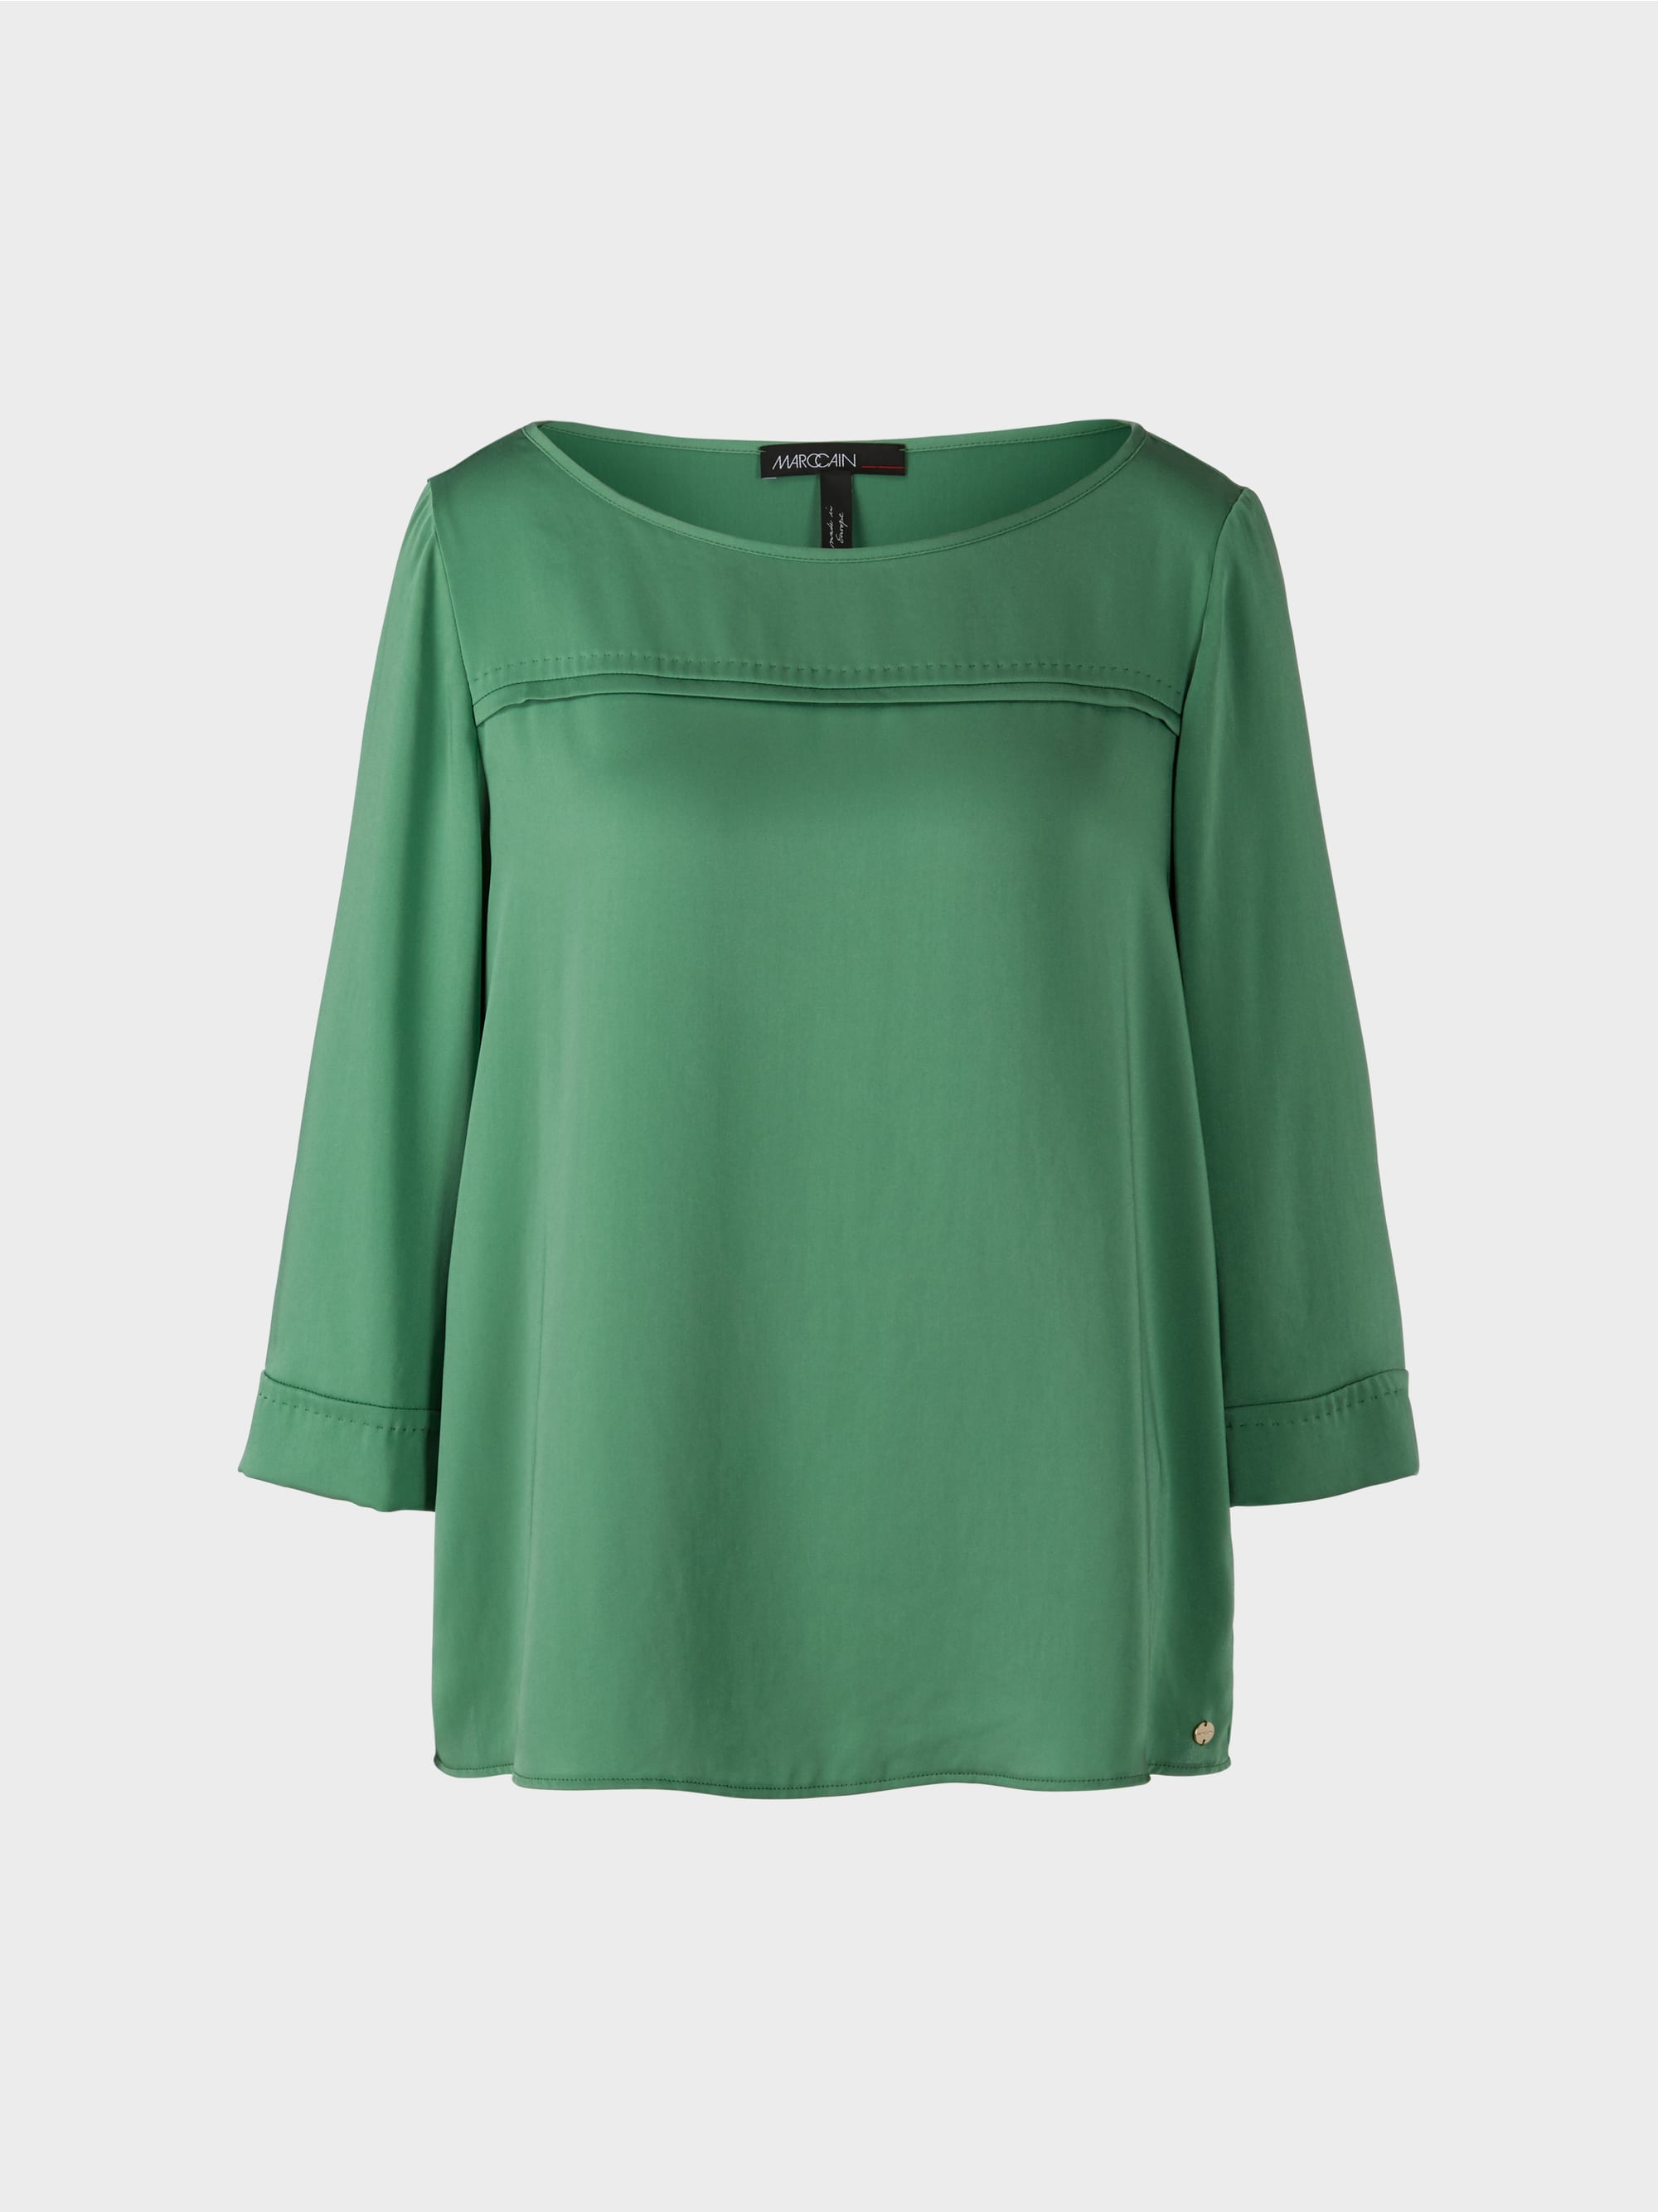 Blouse-Style Top With Boat Neckline